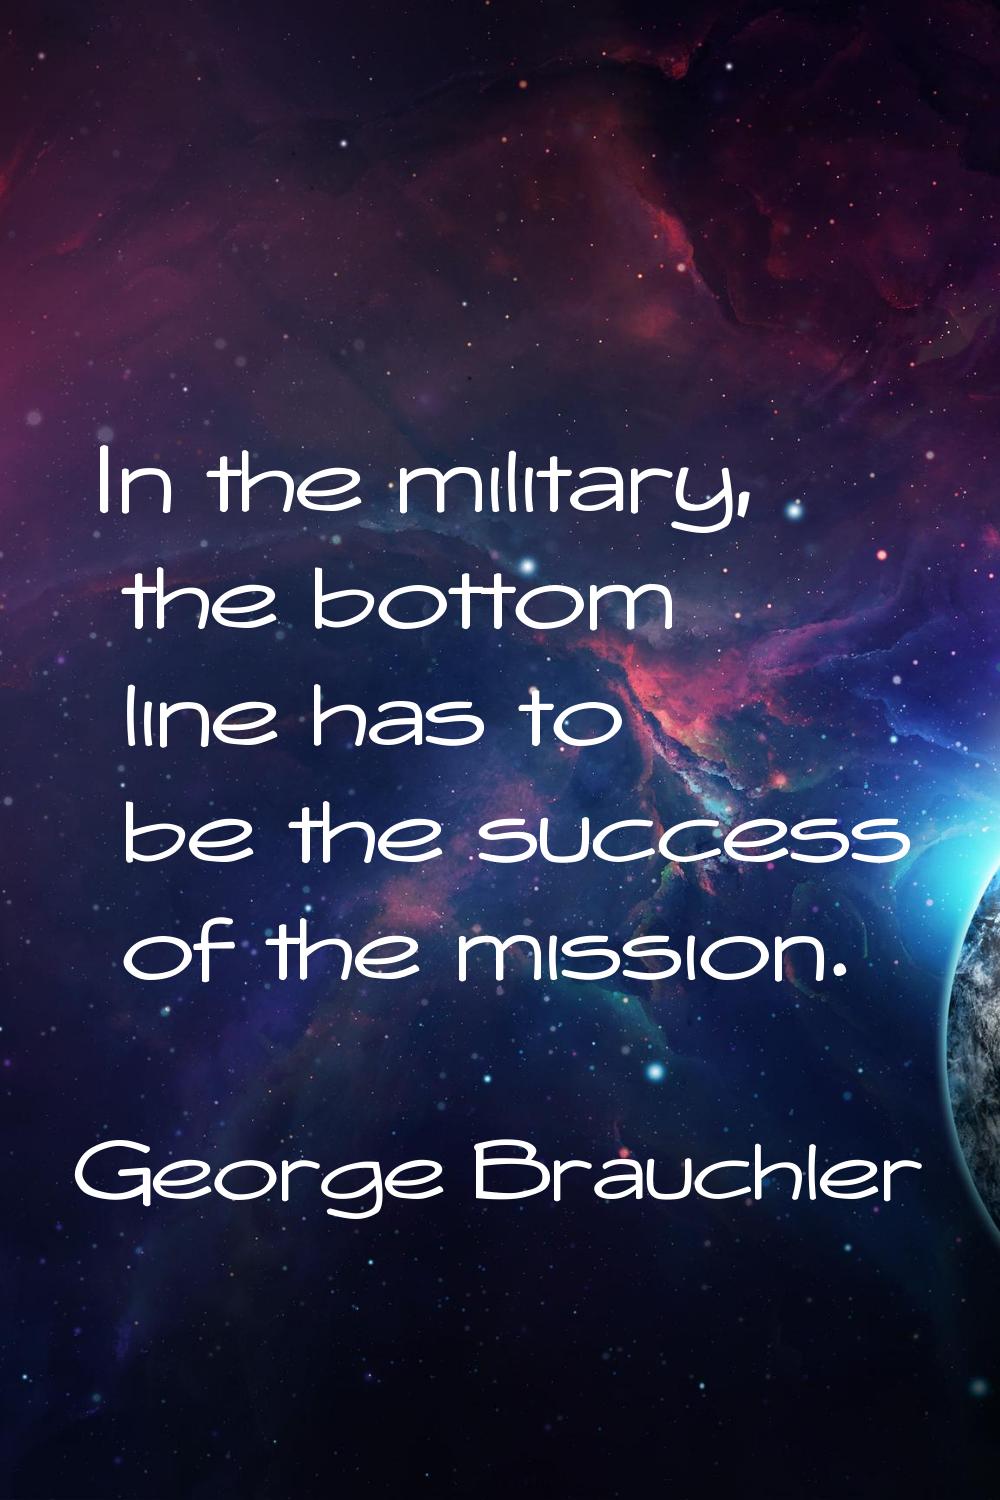 In the military, the bottom line has to be the success of the mission.